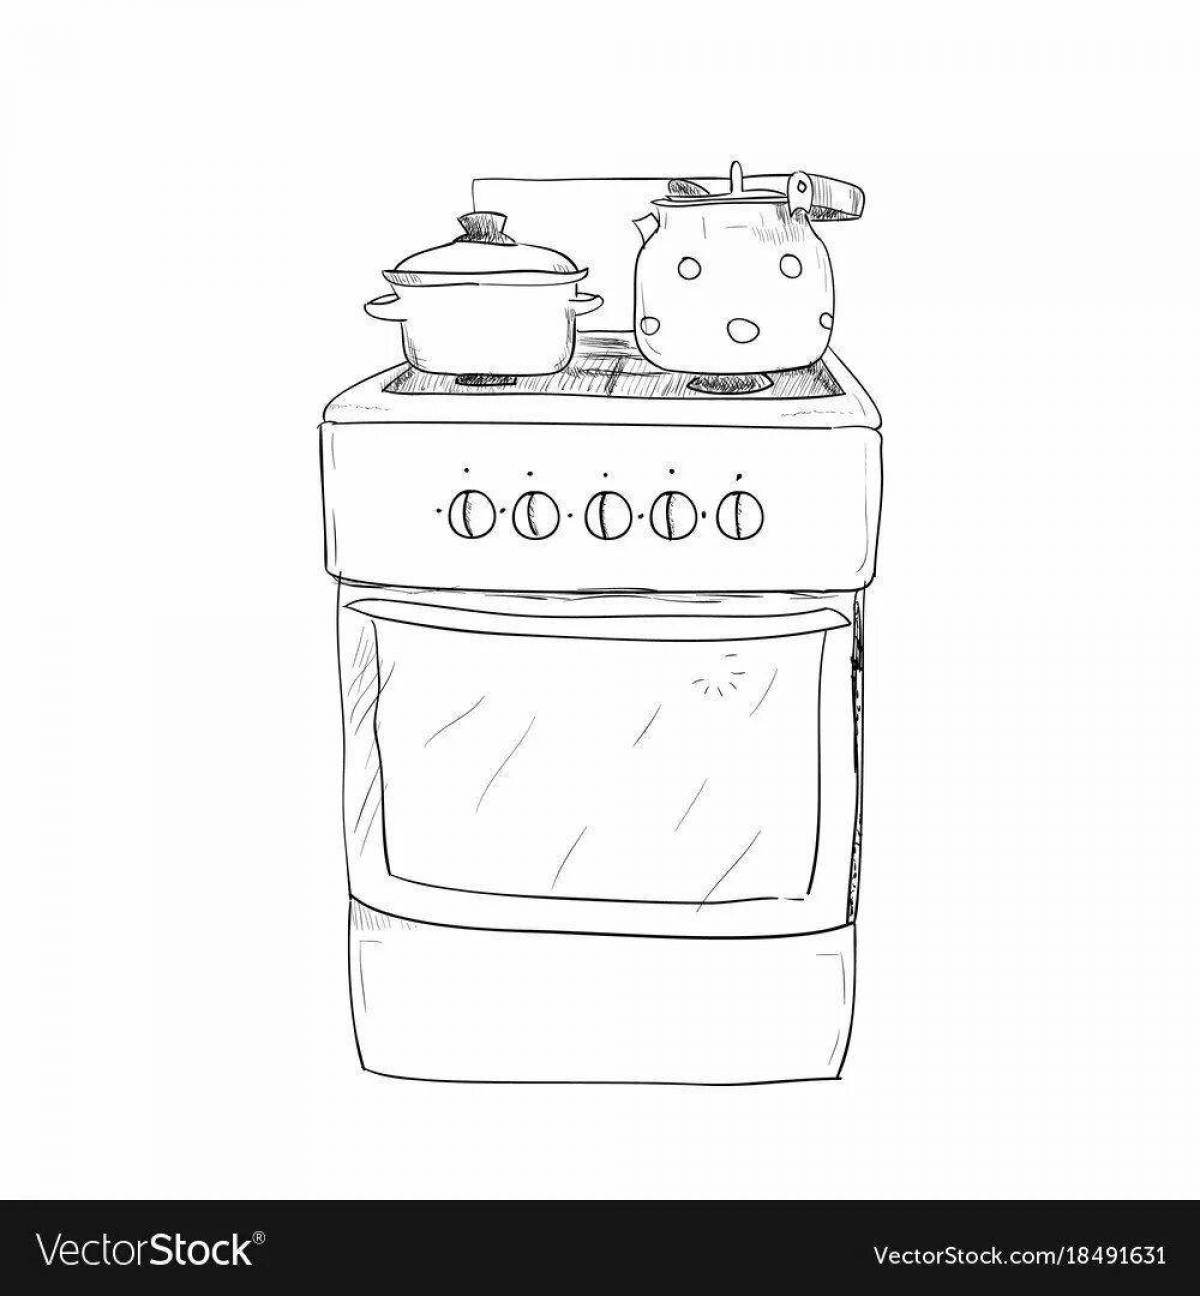 Fashion stove coloring page